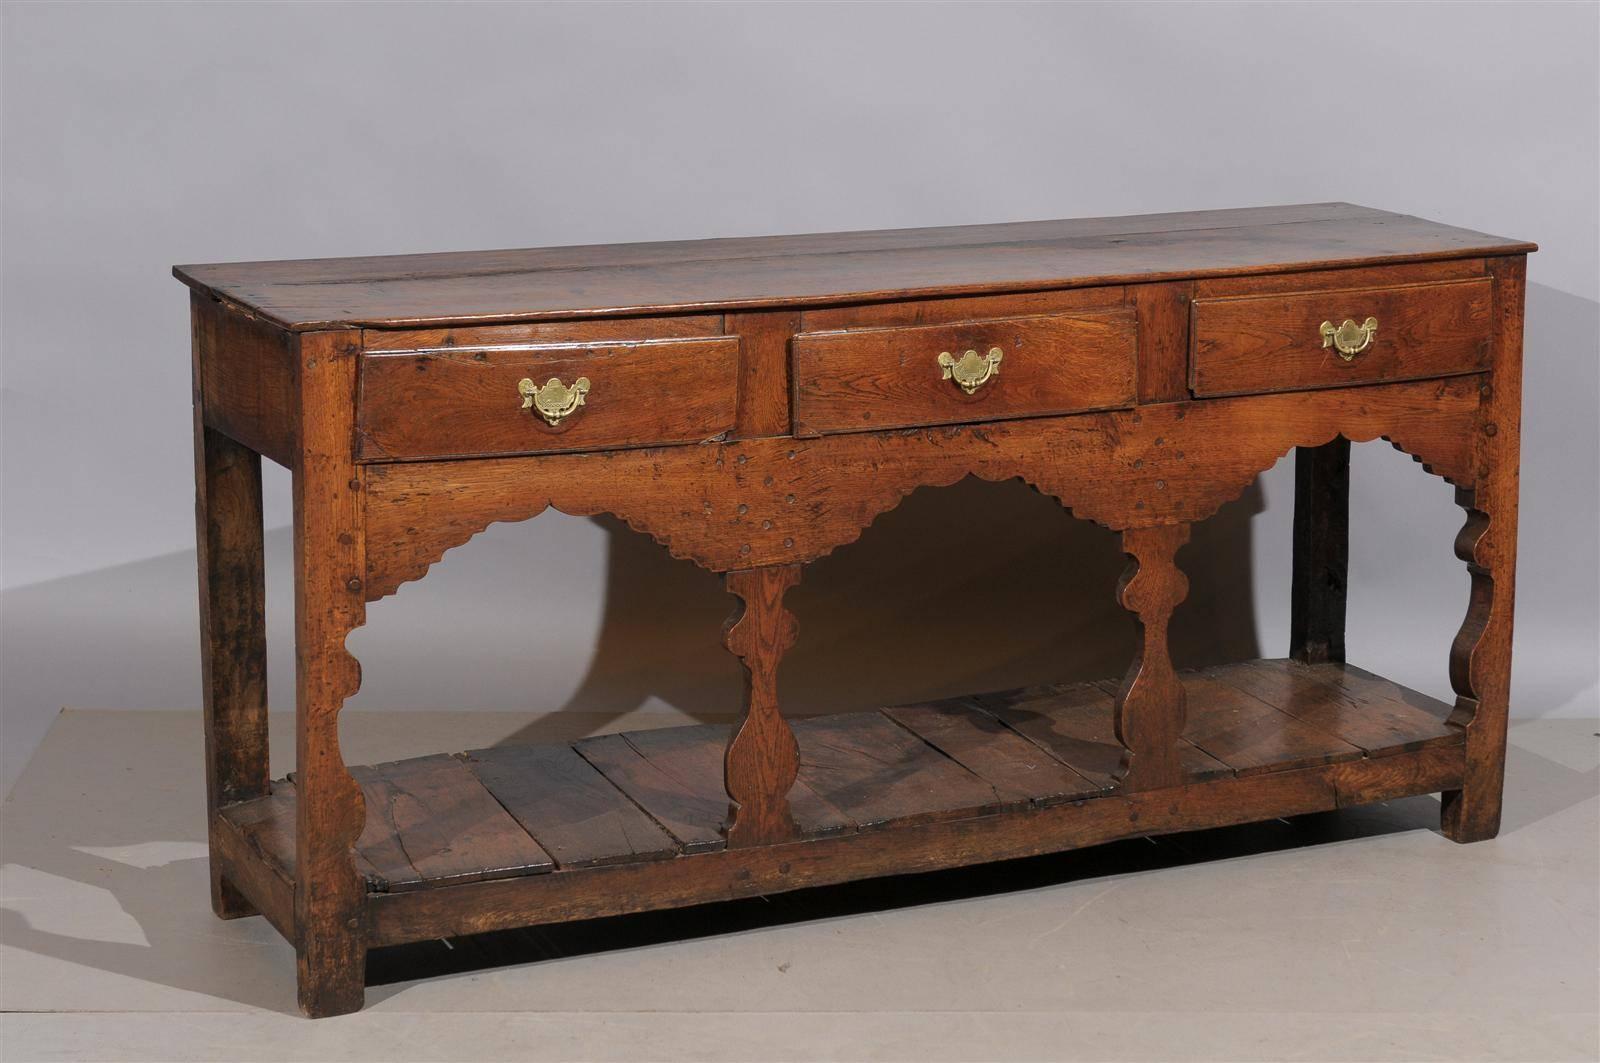 Early 19th century English oak dresser base / server with three drawers and lower plinth base.